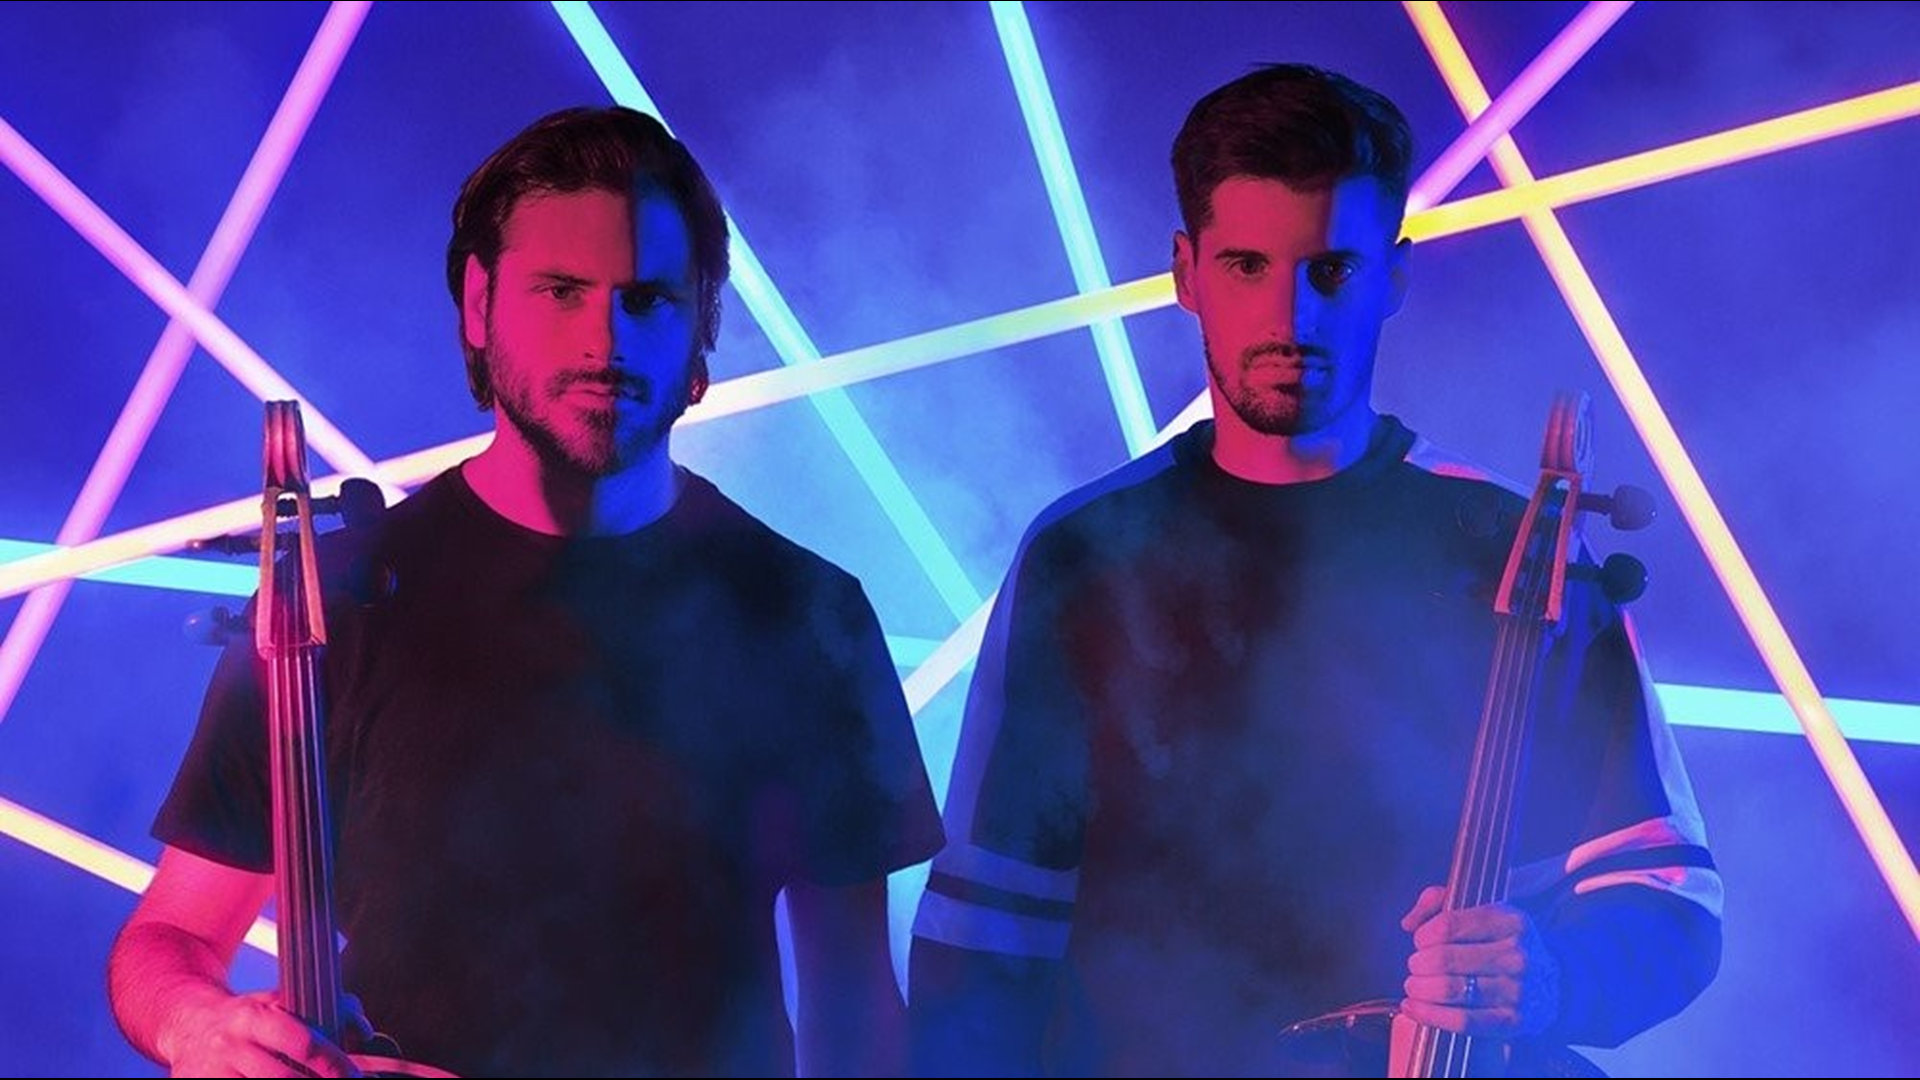 Due to their tour bus being delayed by snow, 2Cellos will not play in Denver on Thursday.